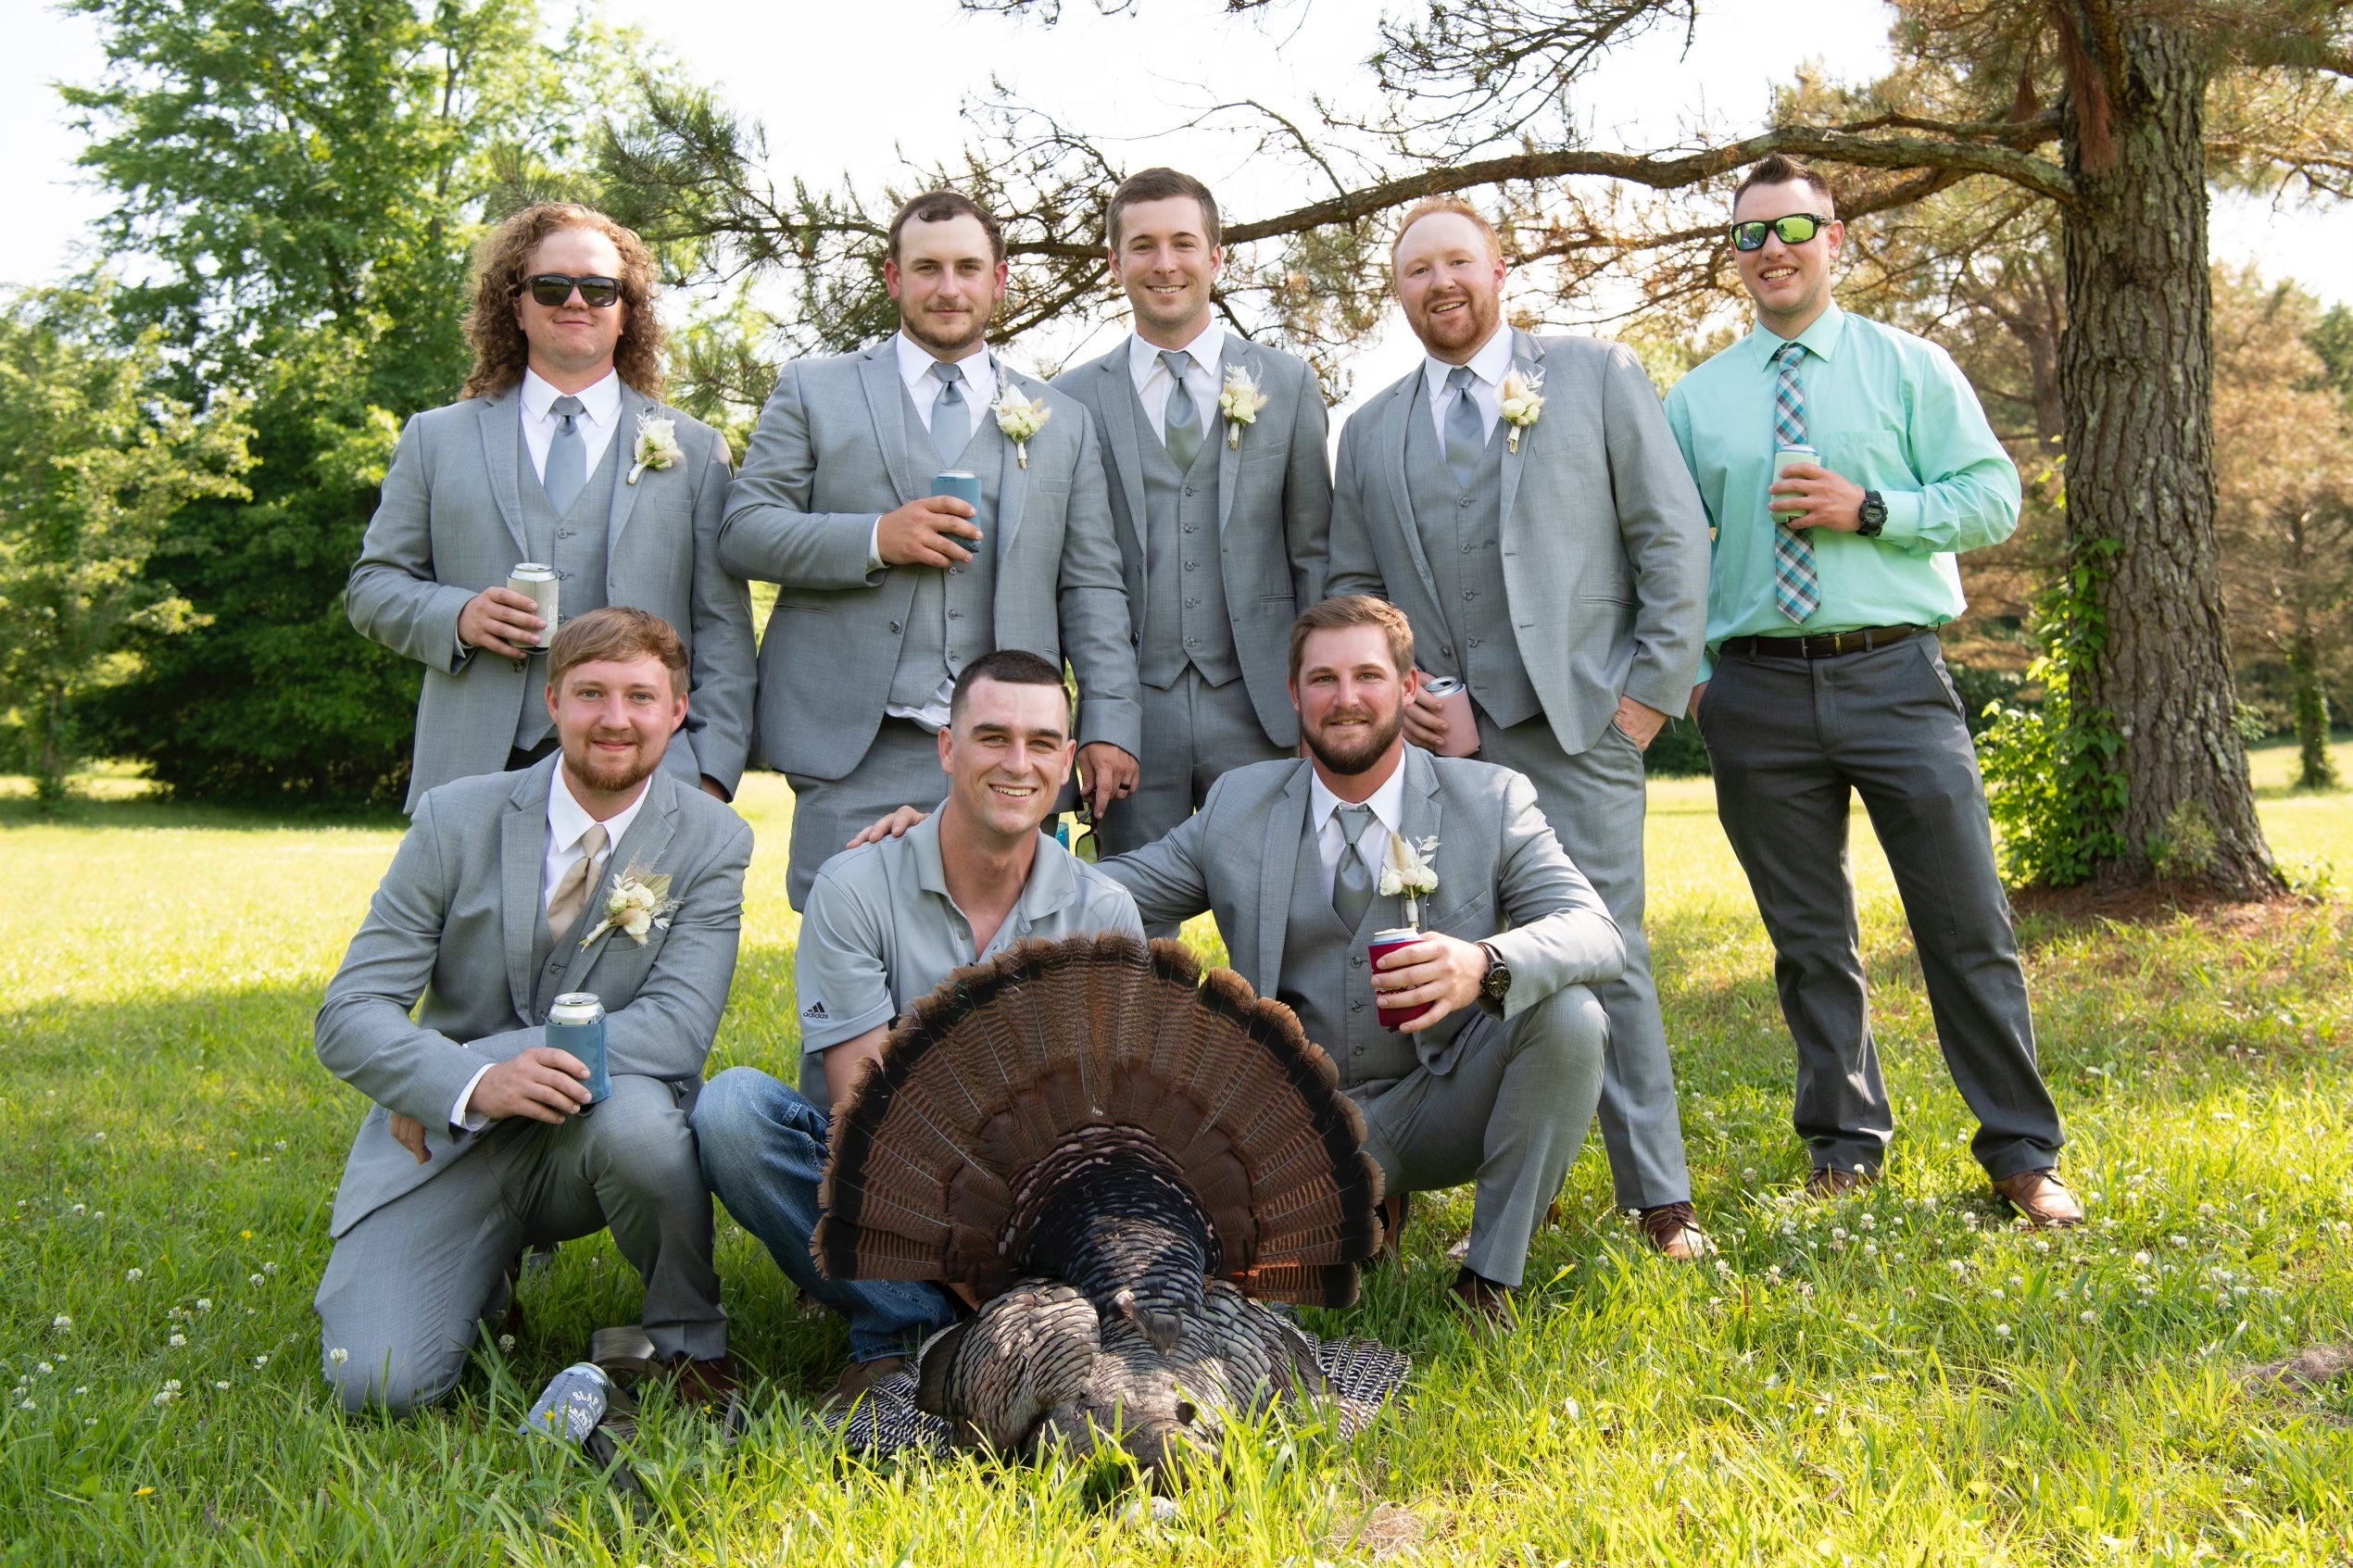 Groom in suits posing with the turkey